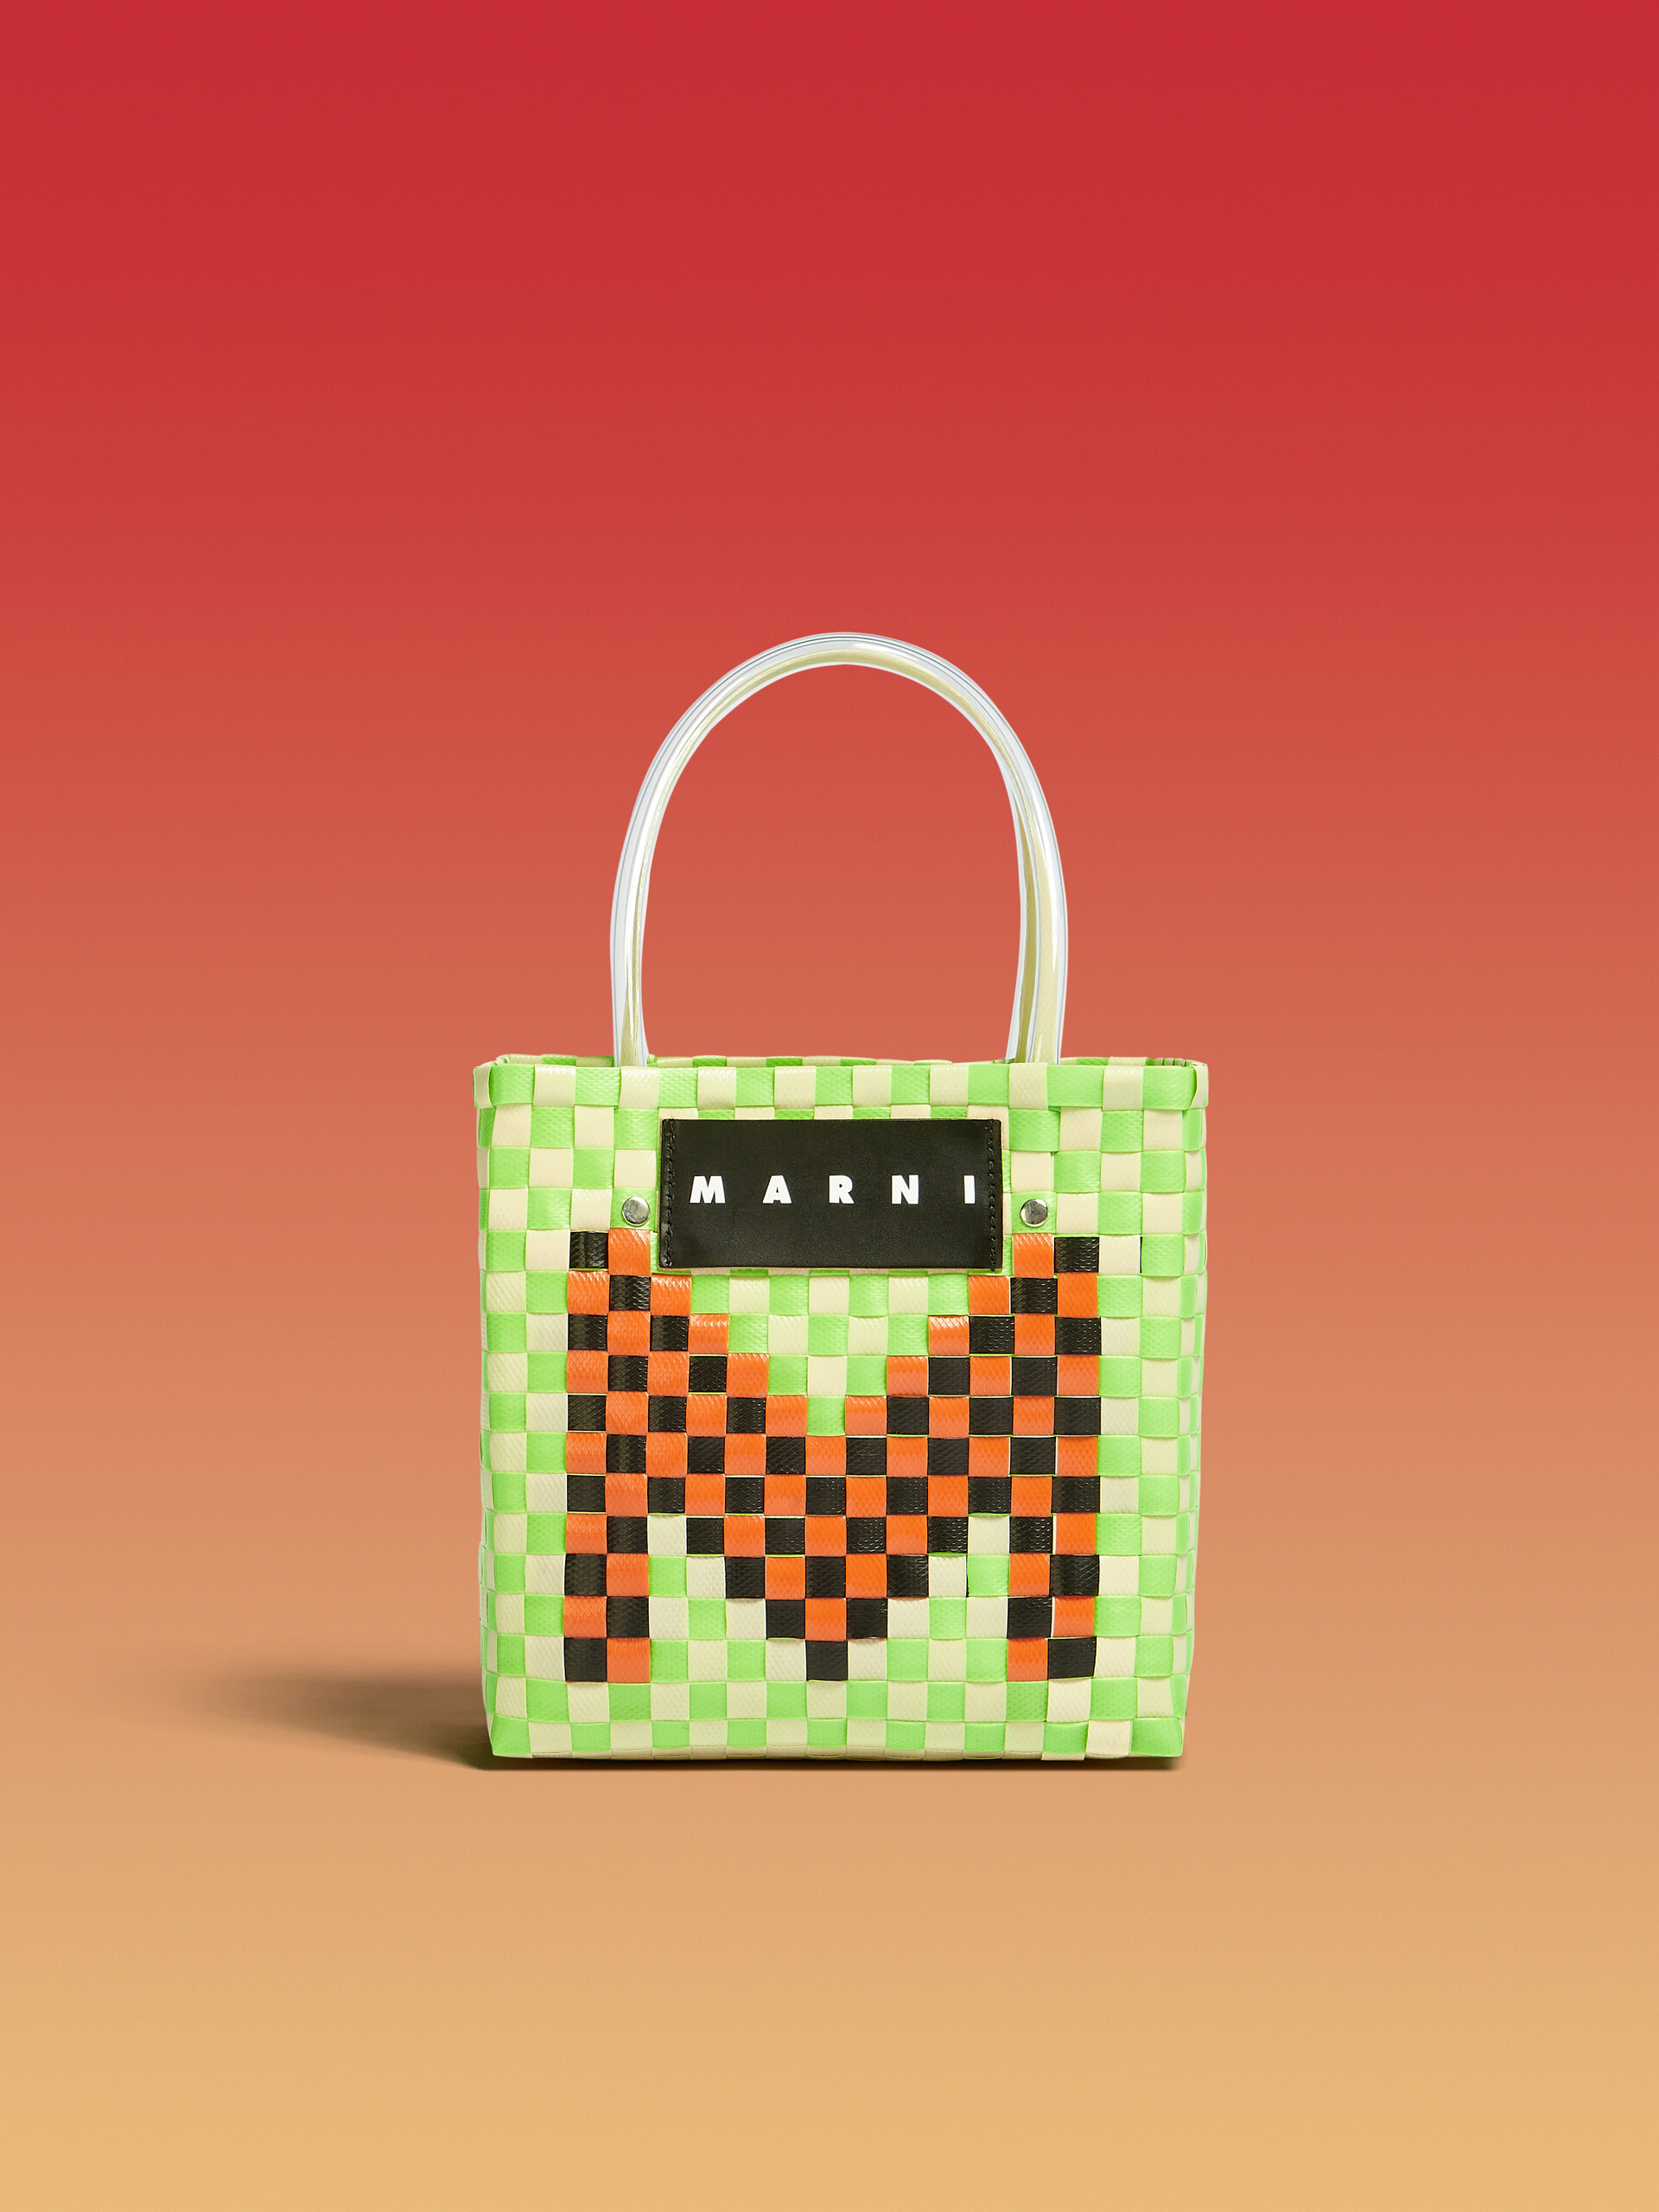 MARNI MARKET shopping bag in green woven material with M logo - Bags - Image 1